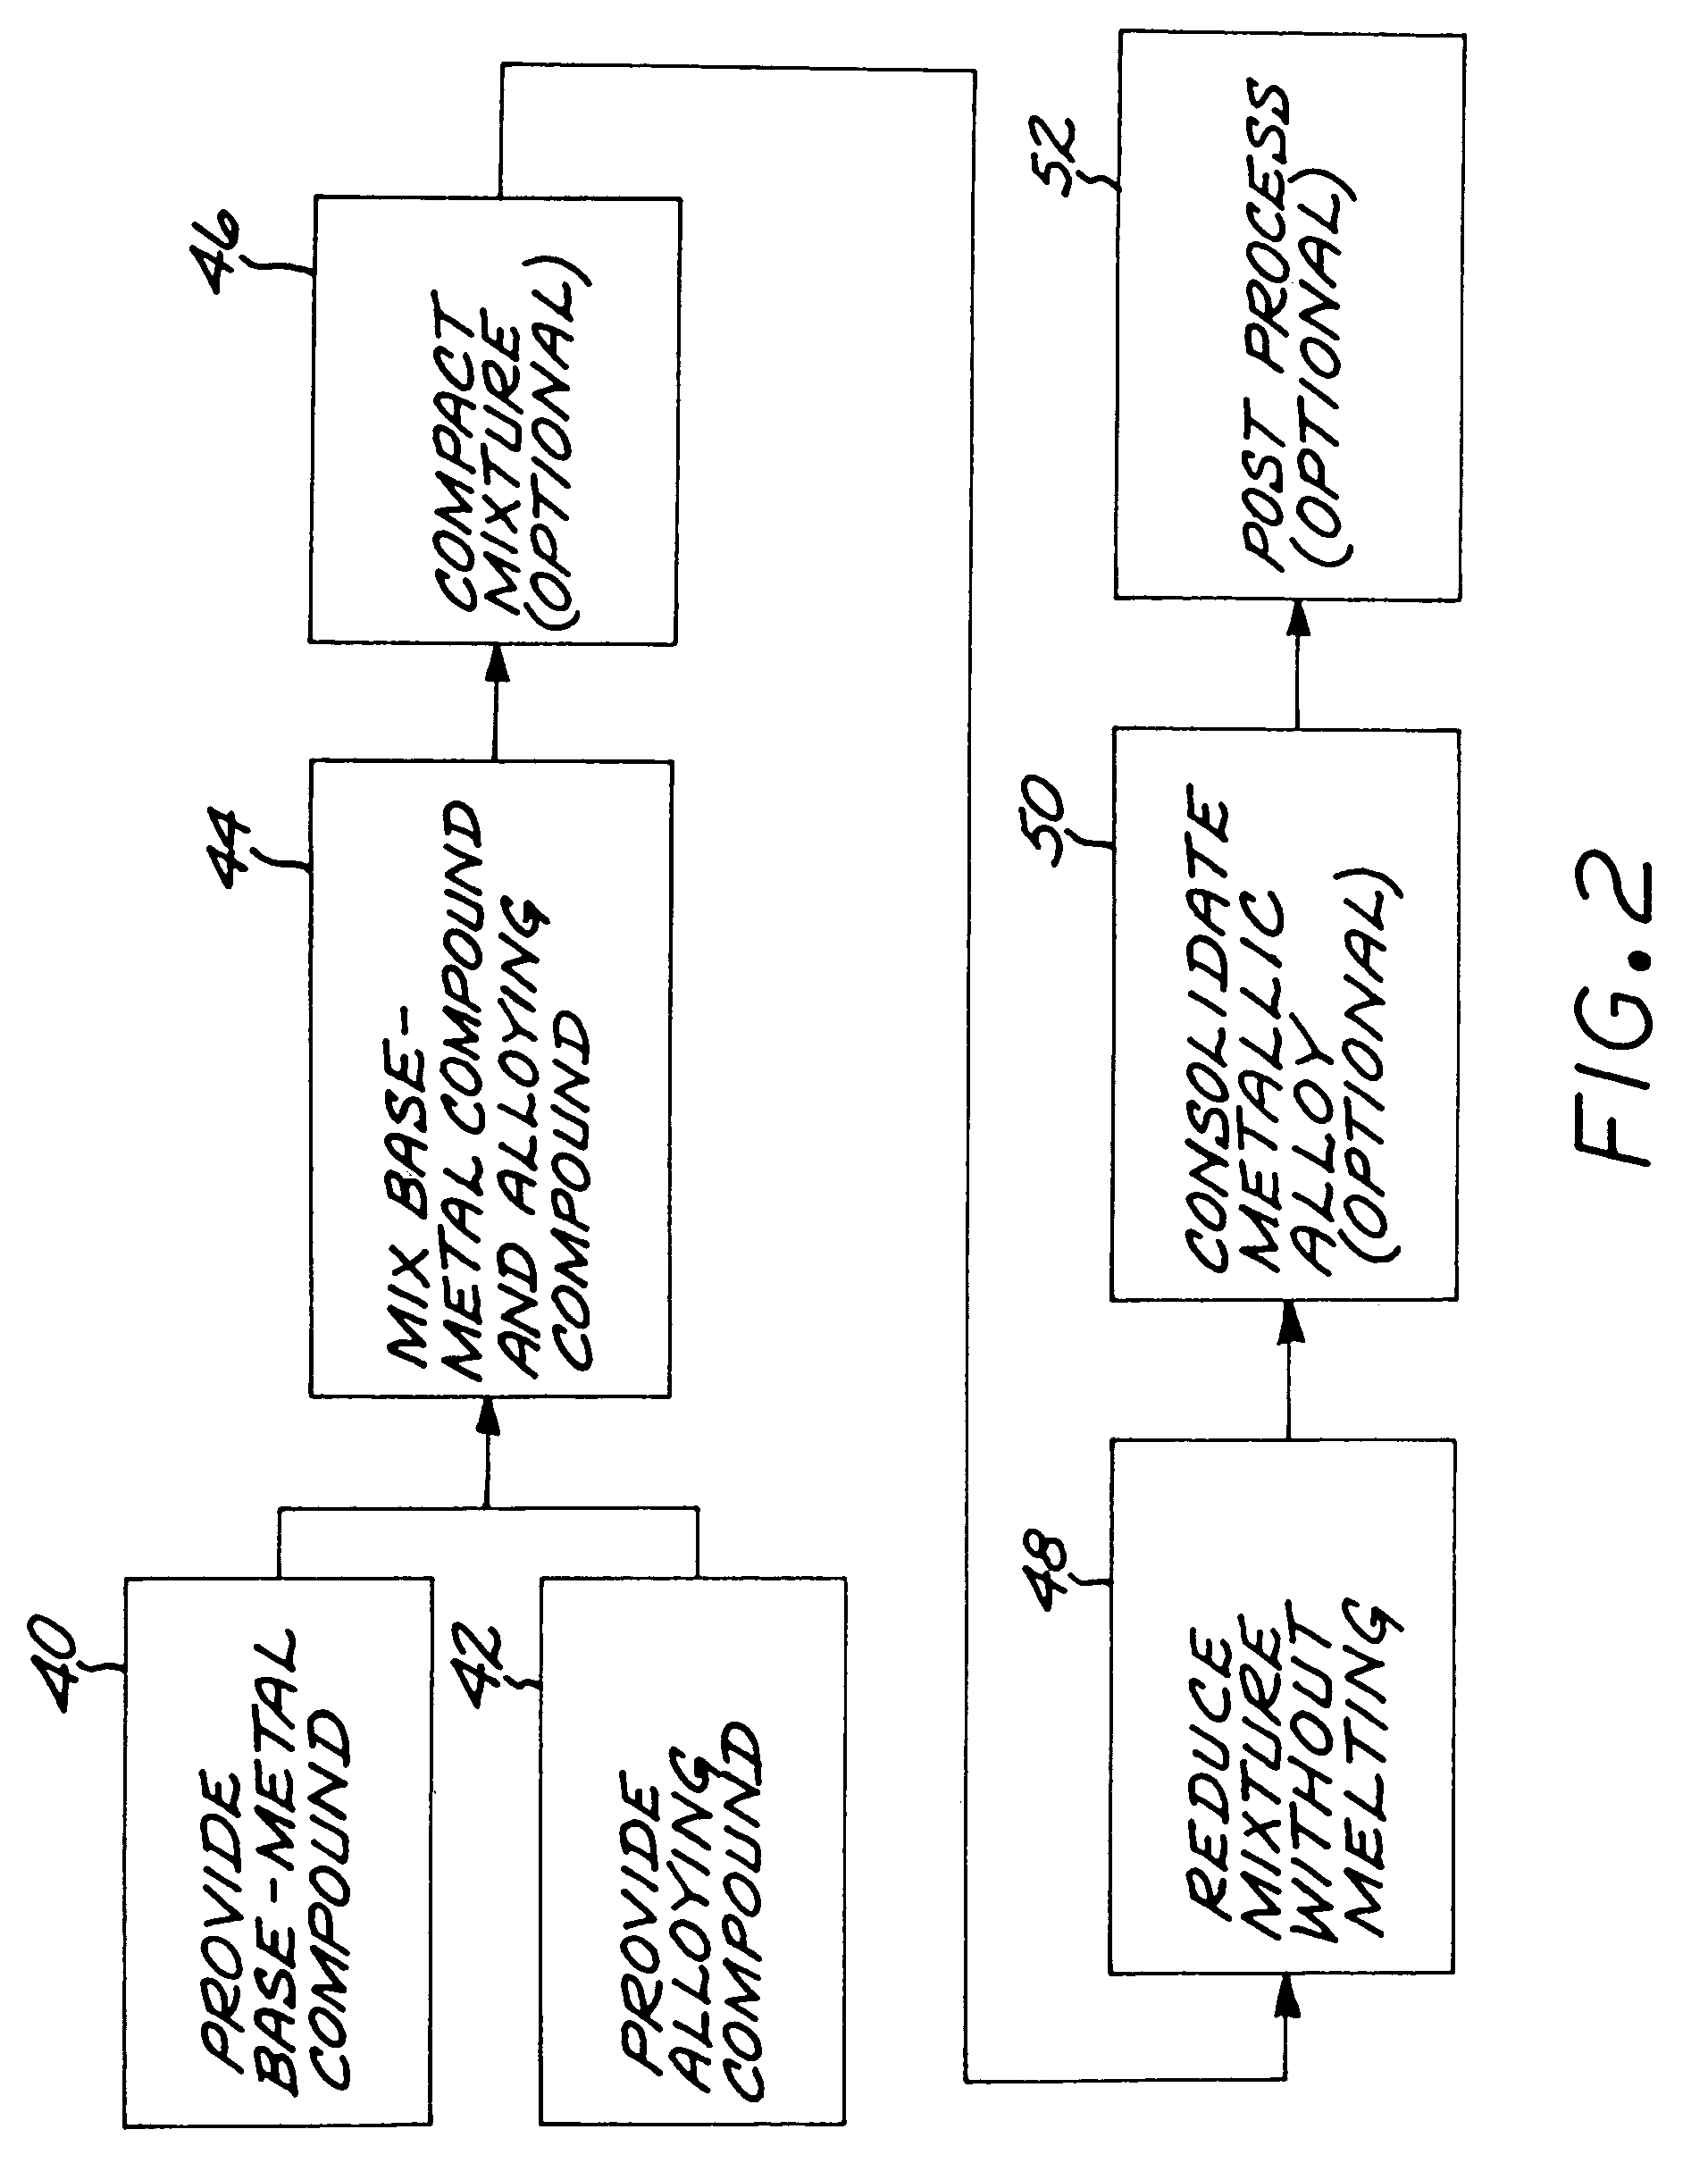 Method for preparing a metallic article having an other additive constituent, without any melting